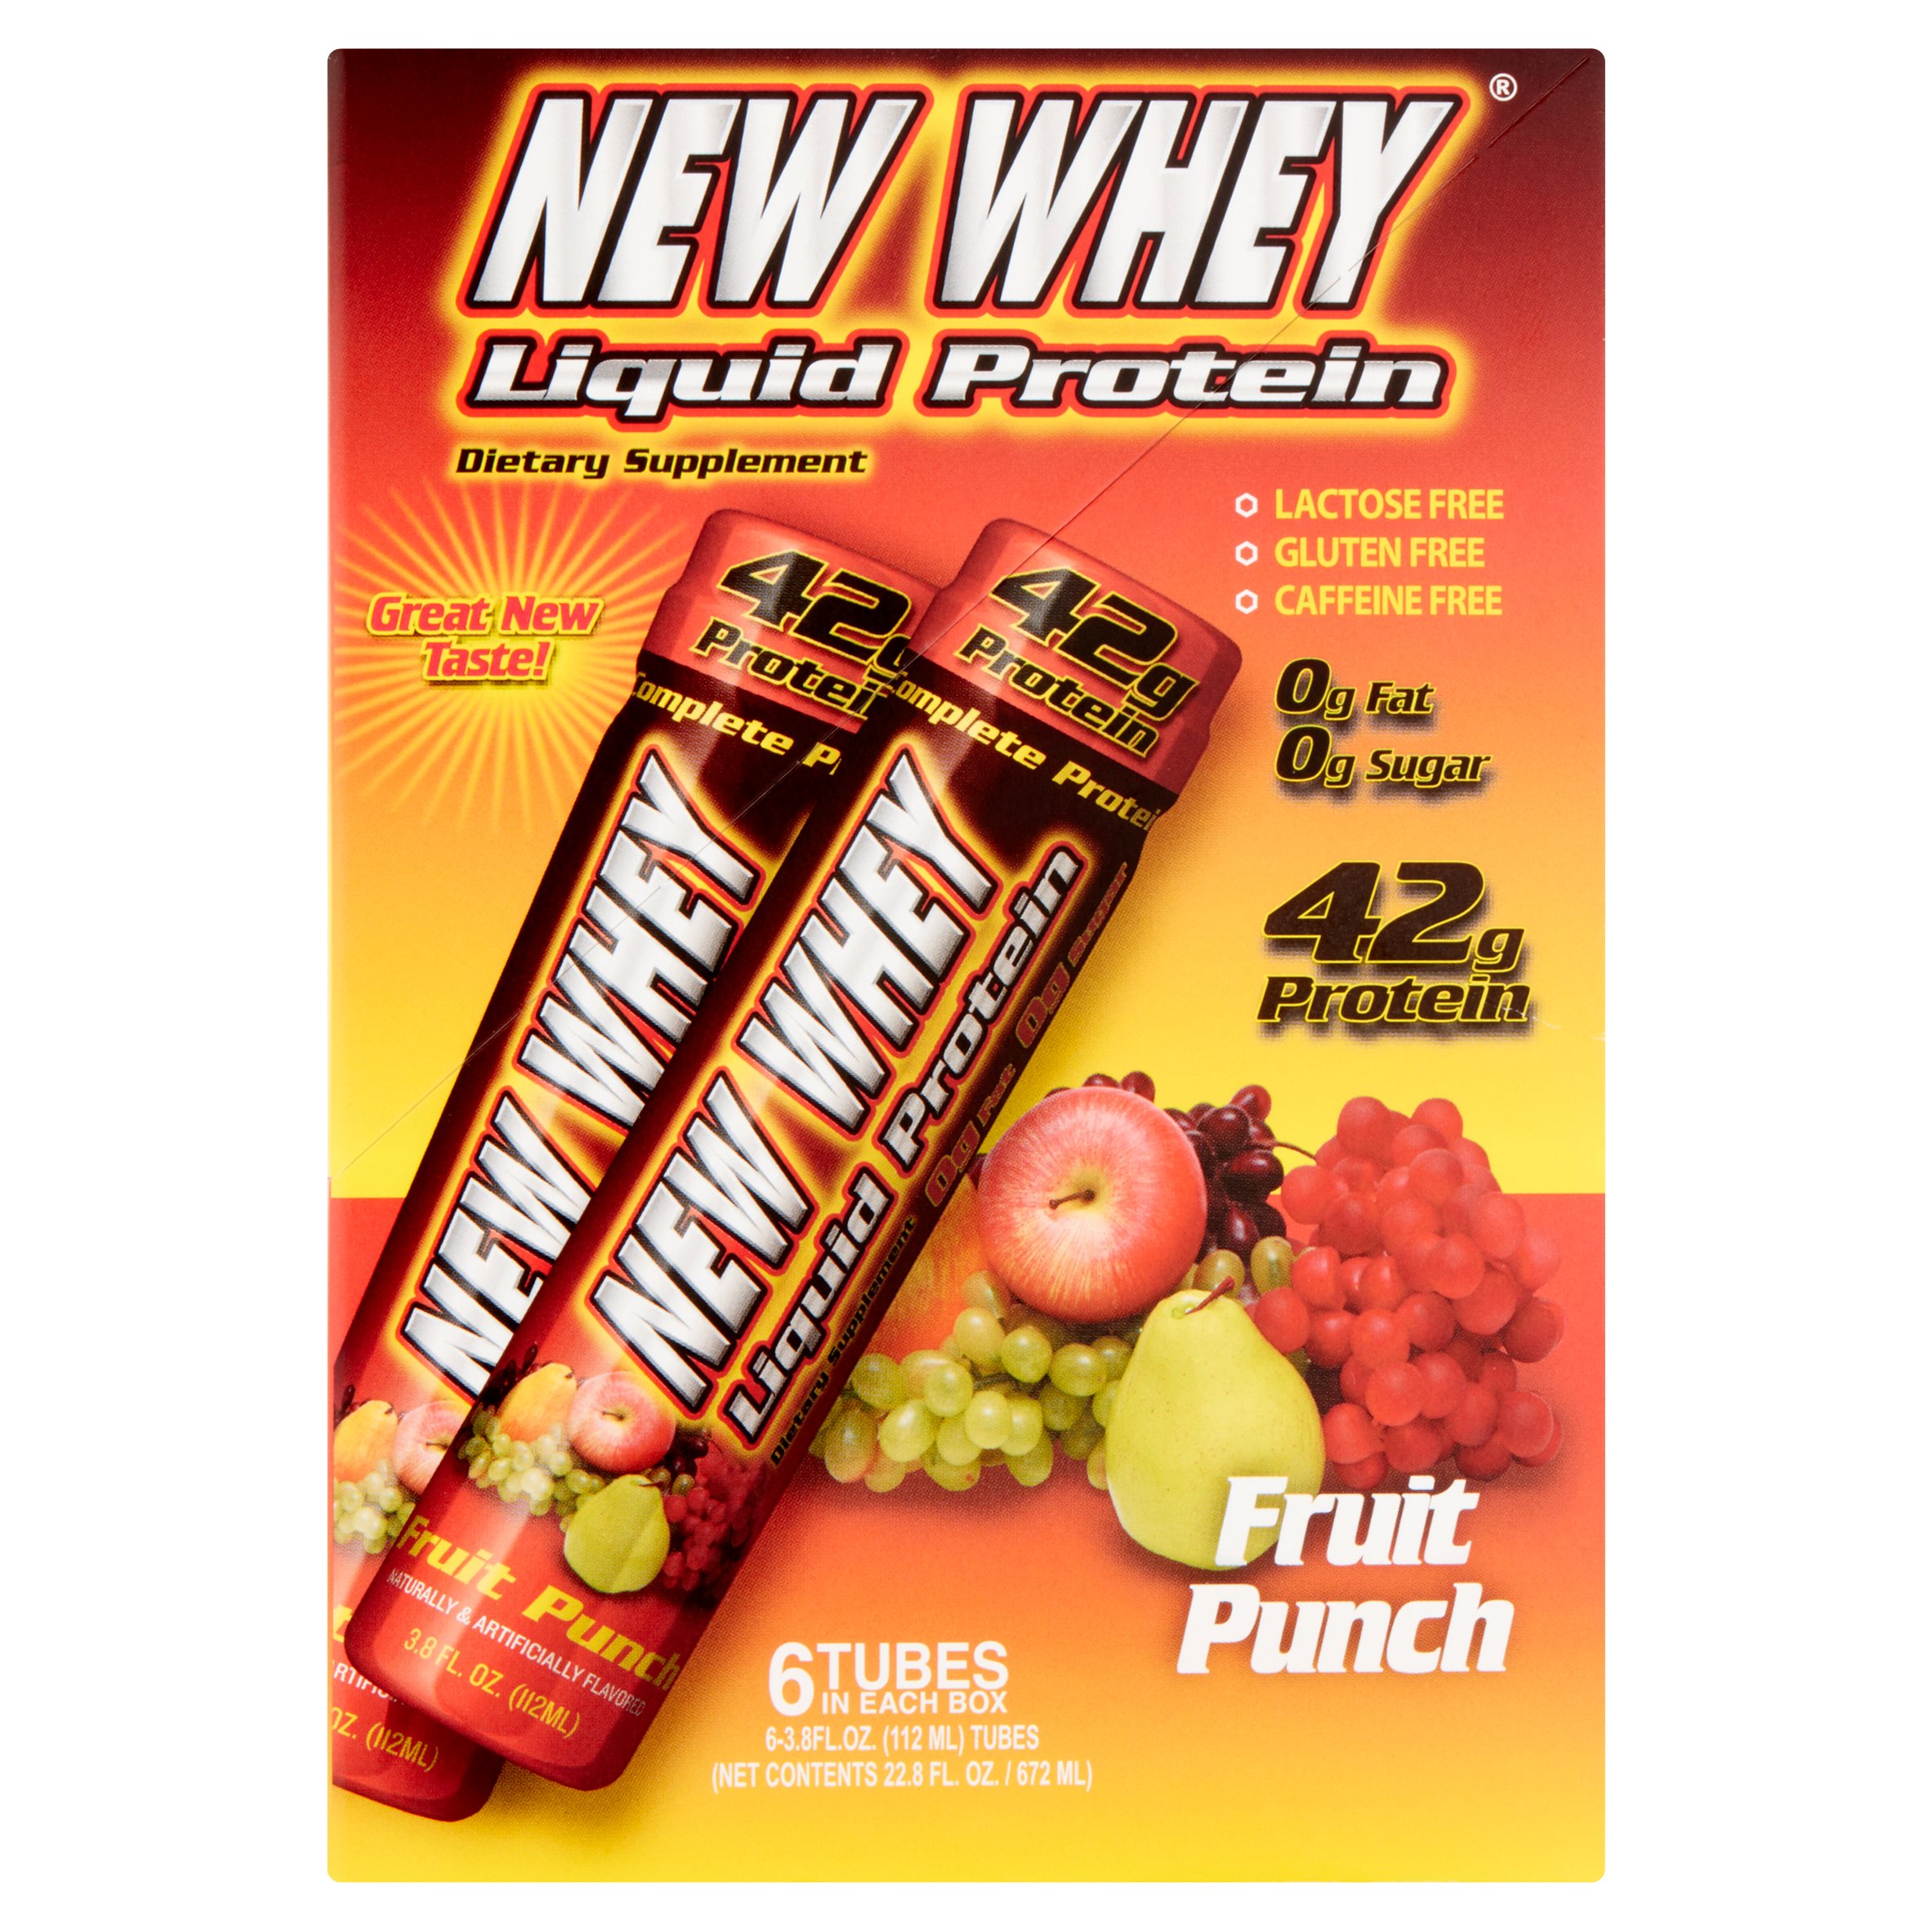 New Whey Protein Drink, 42 Grams of Protein, Fruit Punch, 3.8 Oz, 6 Ct - image 1 of 5